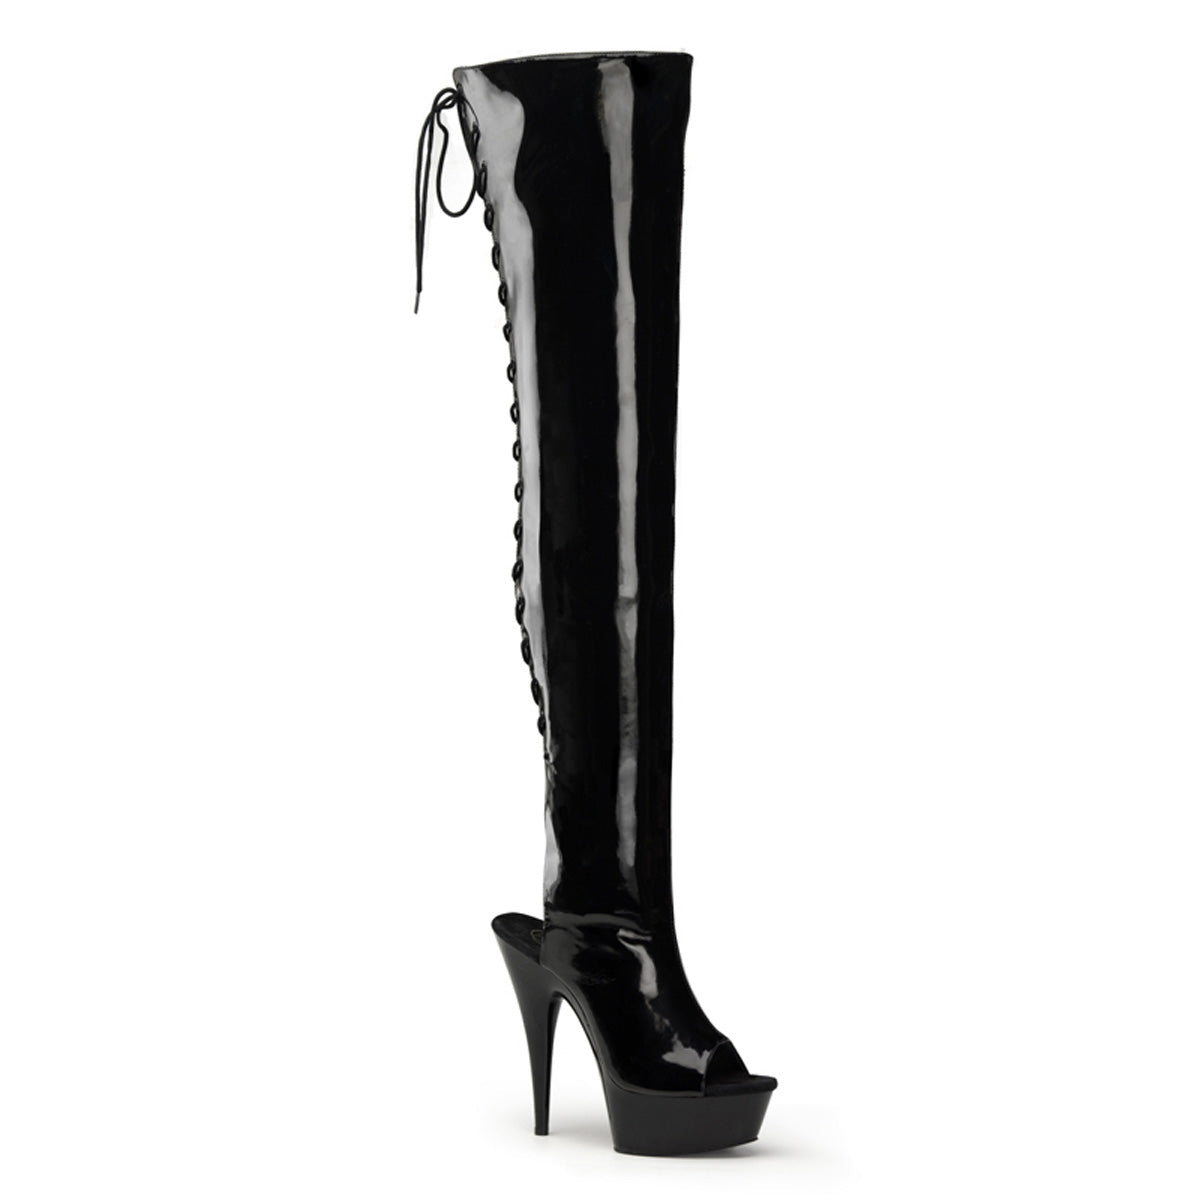 DELIGHT-3017 Black Thigh High Boots  Multi view 1